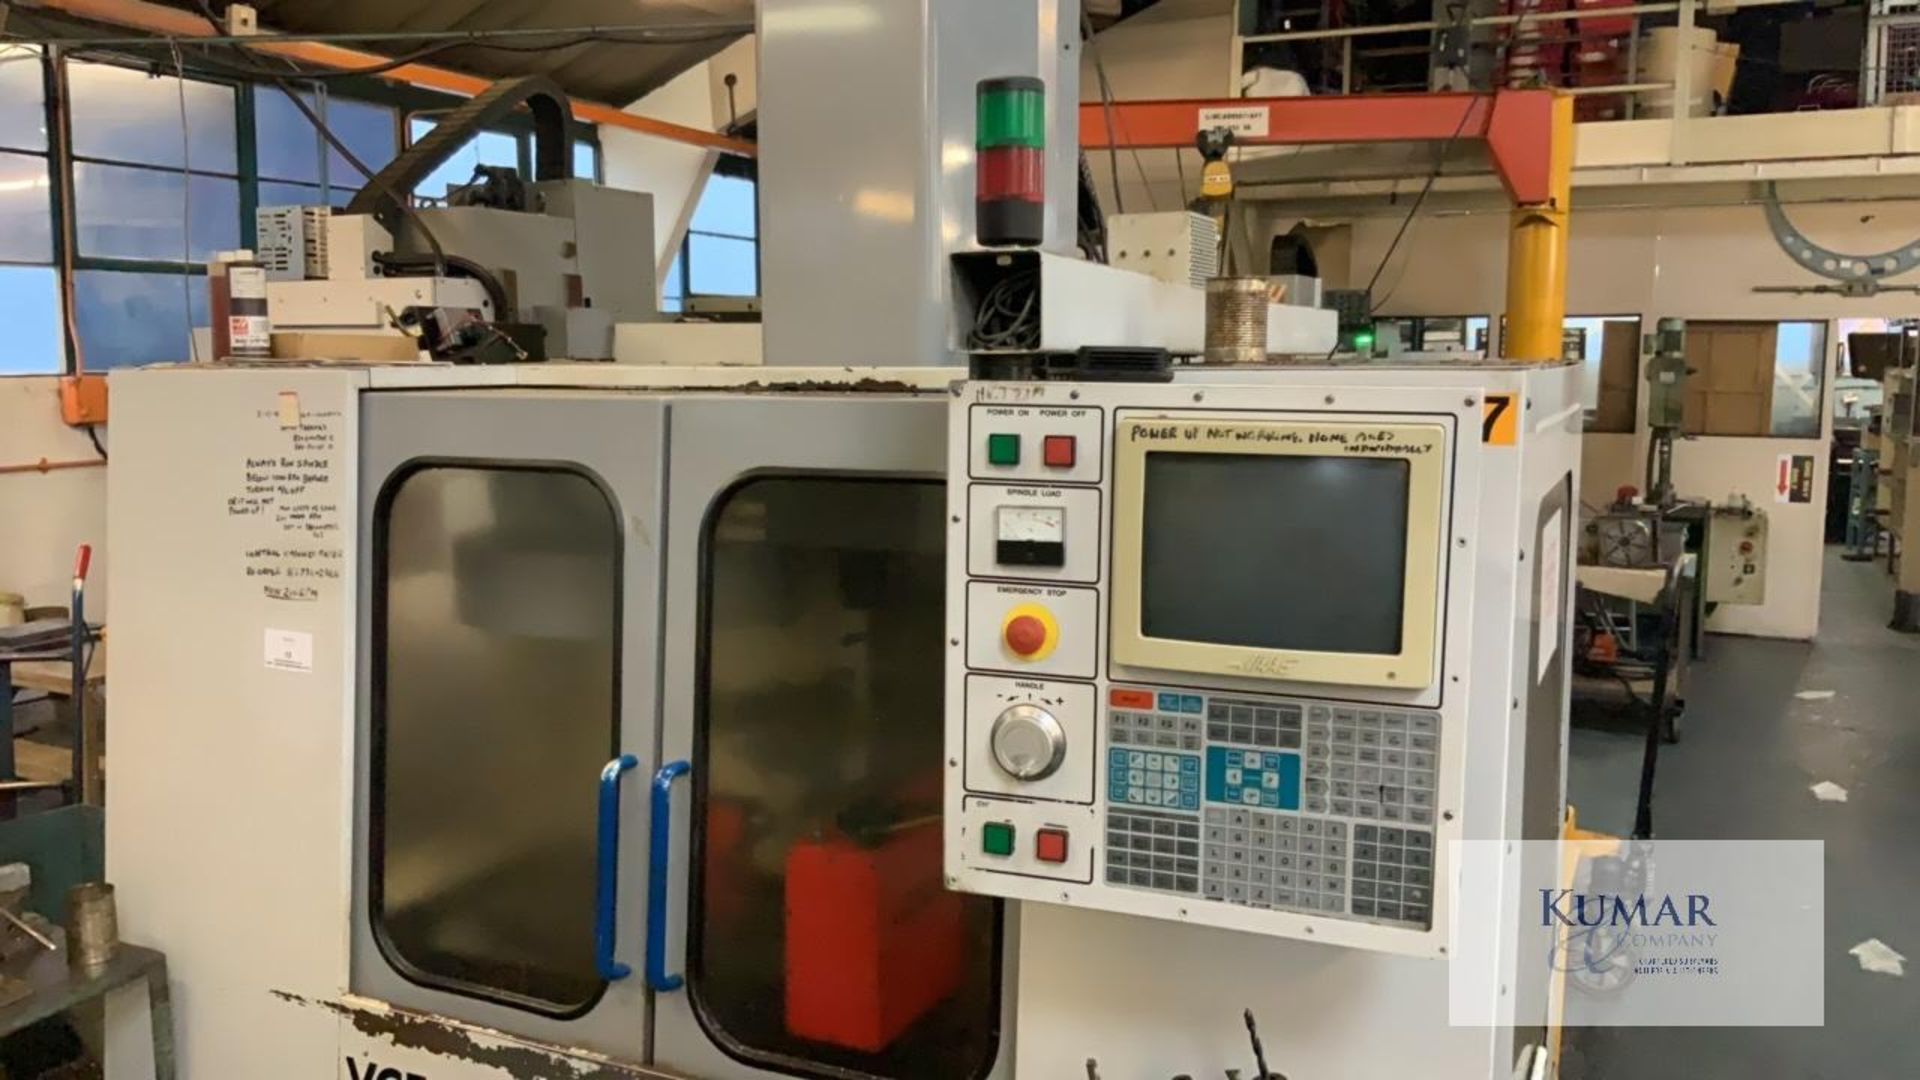 Mikron HAAS VCE 750 Machining Centre, Serial No: 11657, (09/97) with chucks as shown - Image 2 of 10